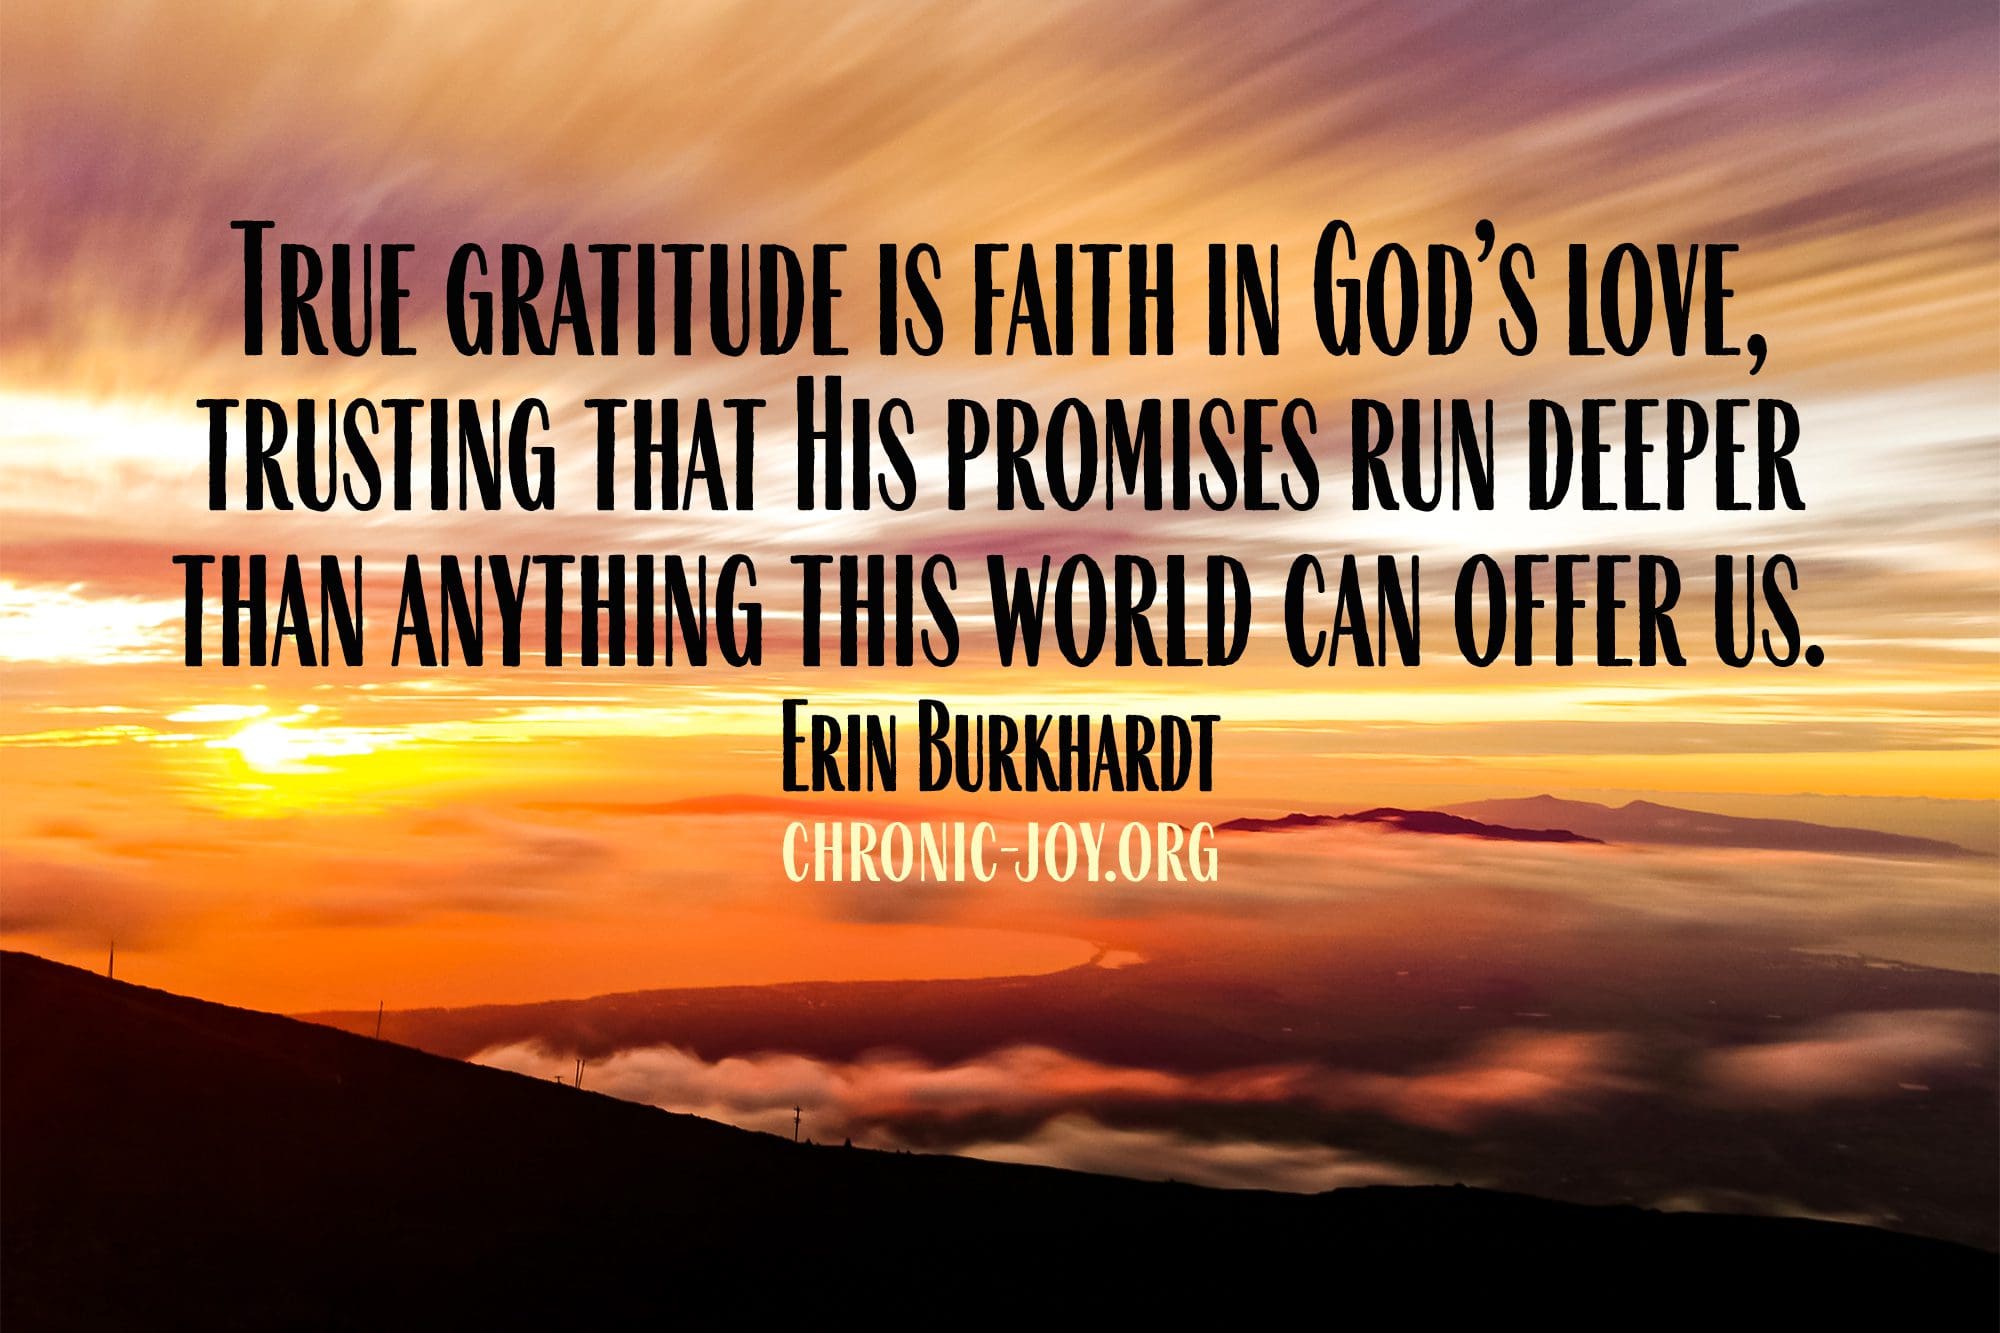 "True gratitude is faith in God’s love, trusting that His promises run deeper than anything this world can offer us." Erin Burkhardt